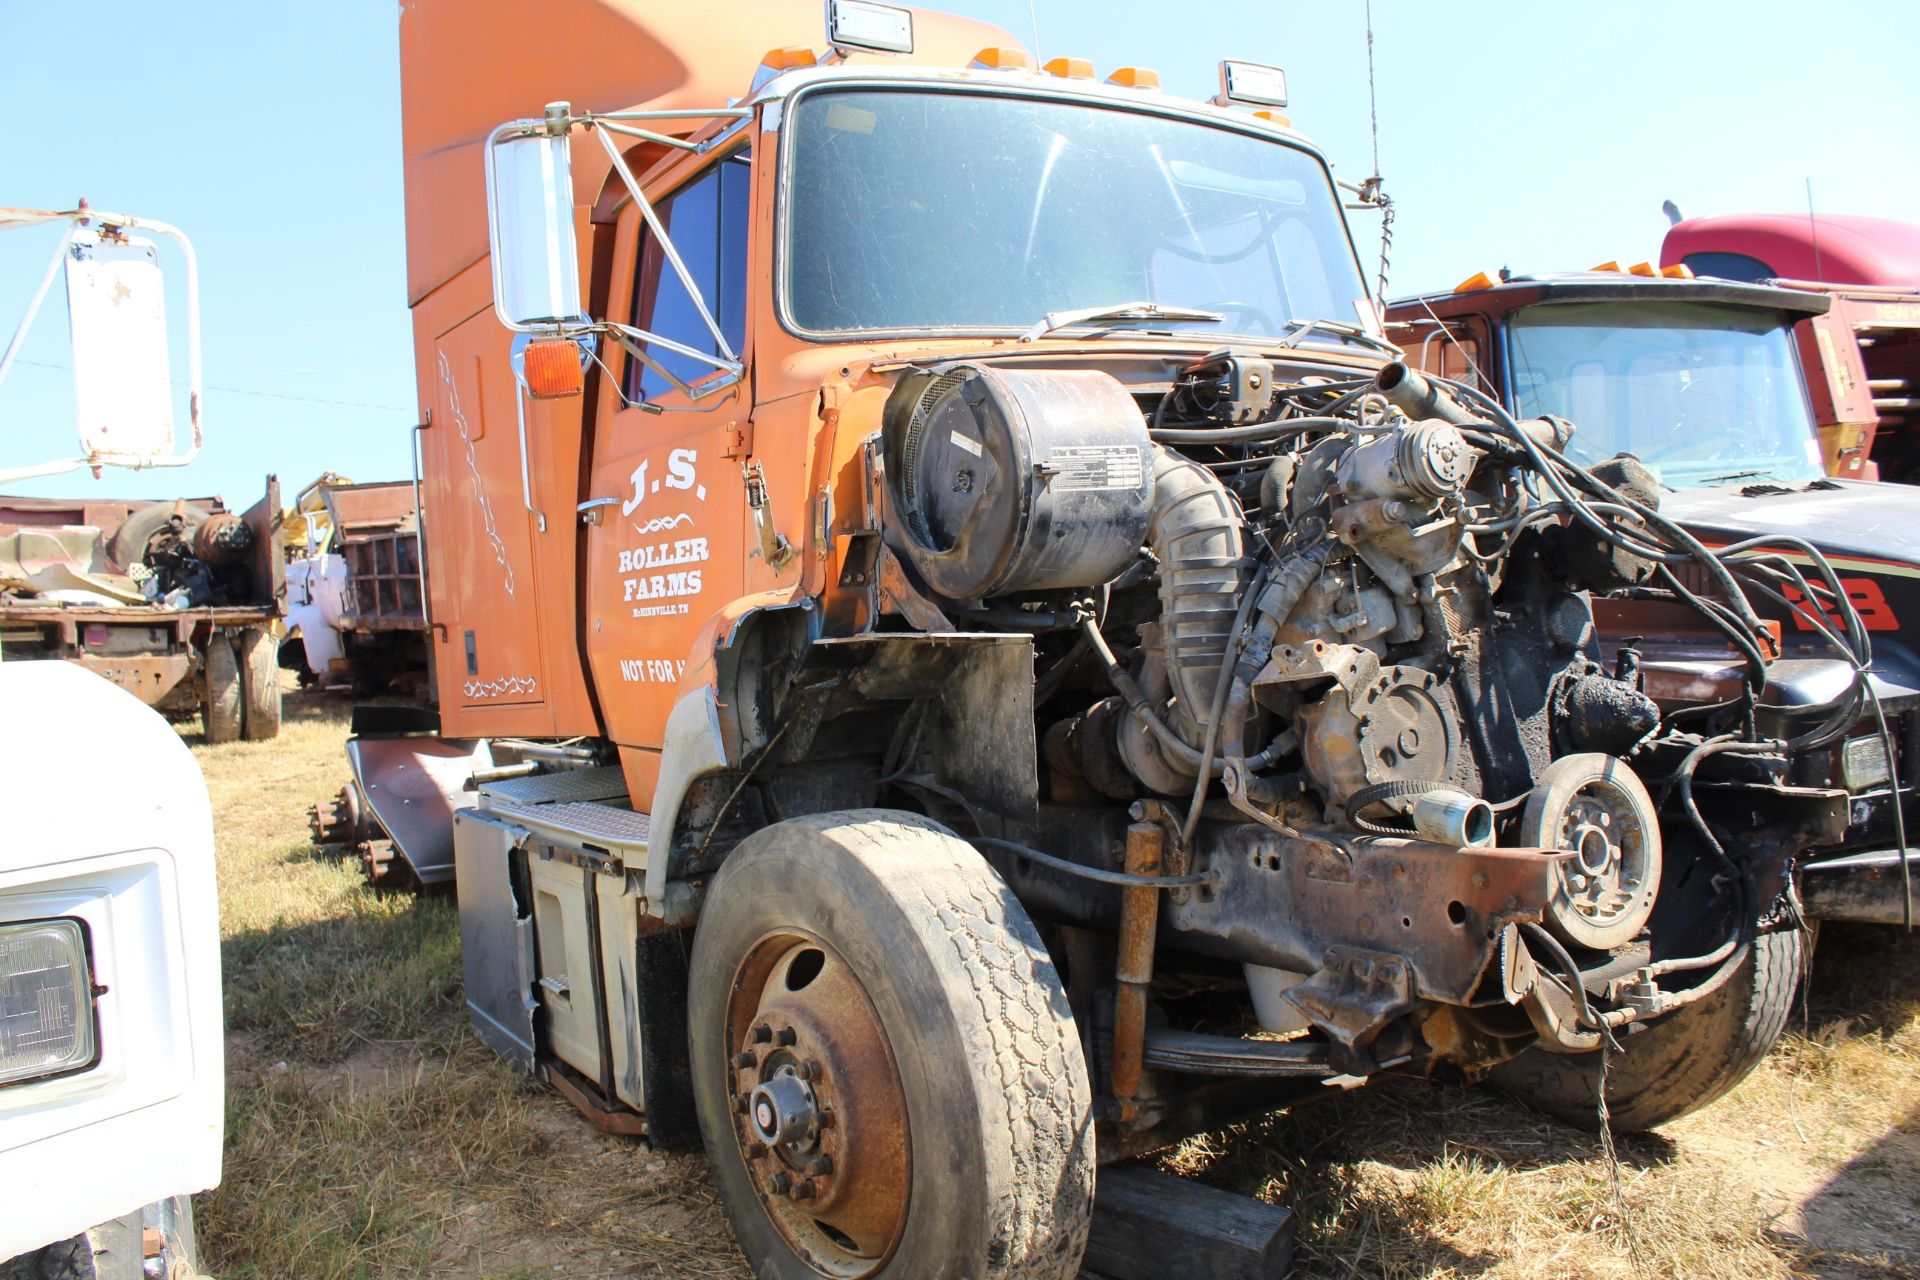 1990 Ford L9000 Road Tractor w/ Sleeper Cat Engine 10-Speed Trans - Parts Unit, No Tires, No